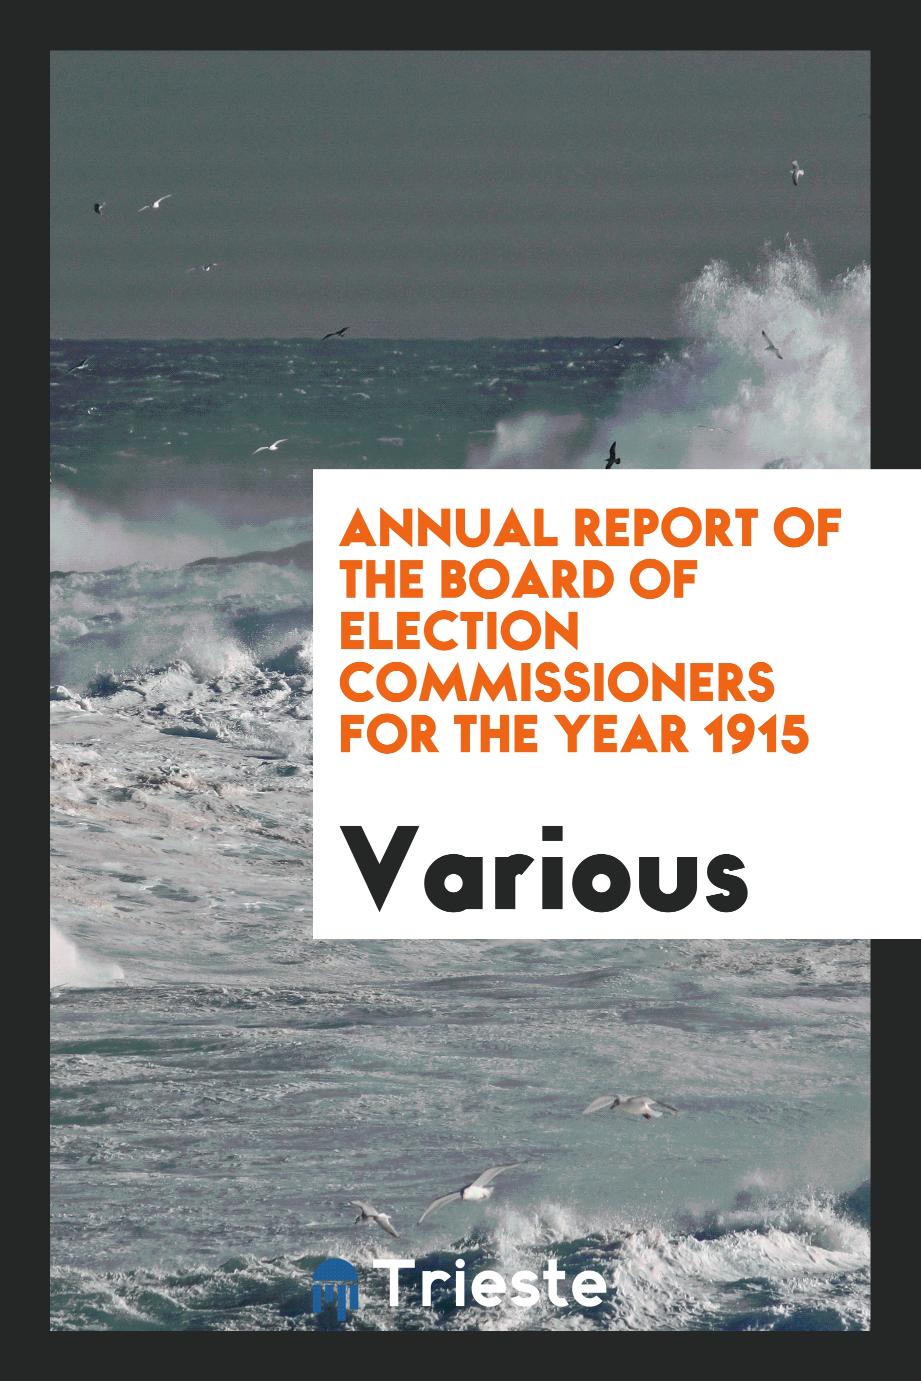 Annual Report of the Board of Election Commissioners for the Year 1915